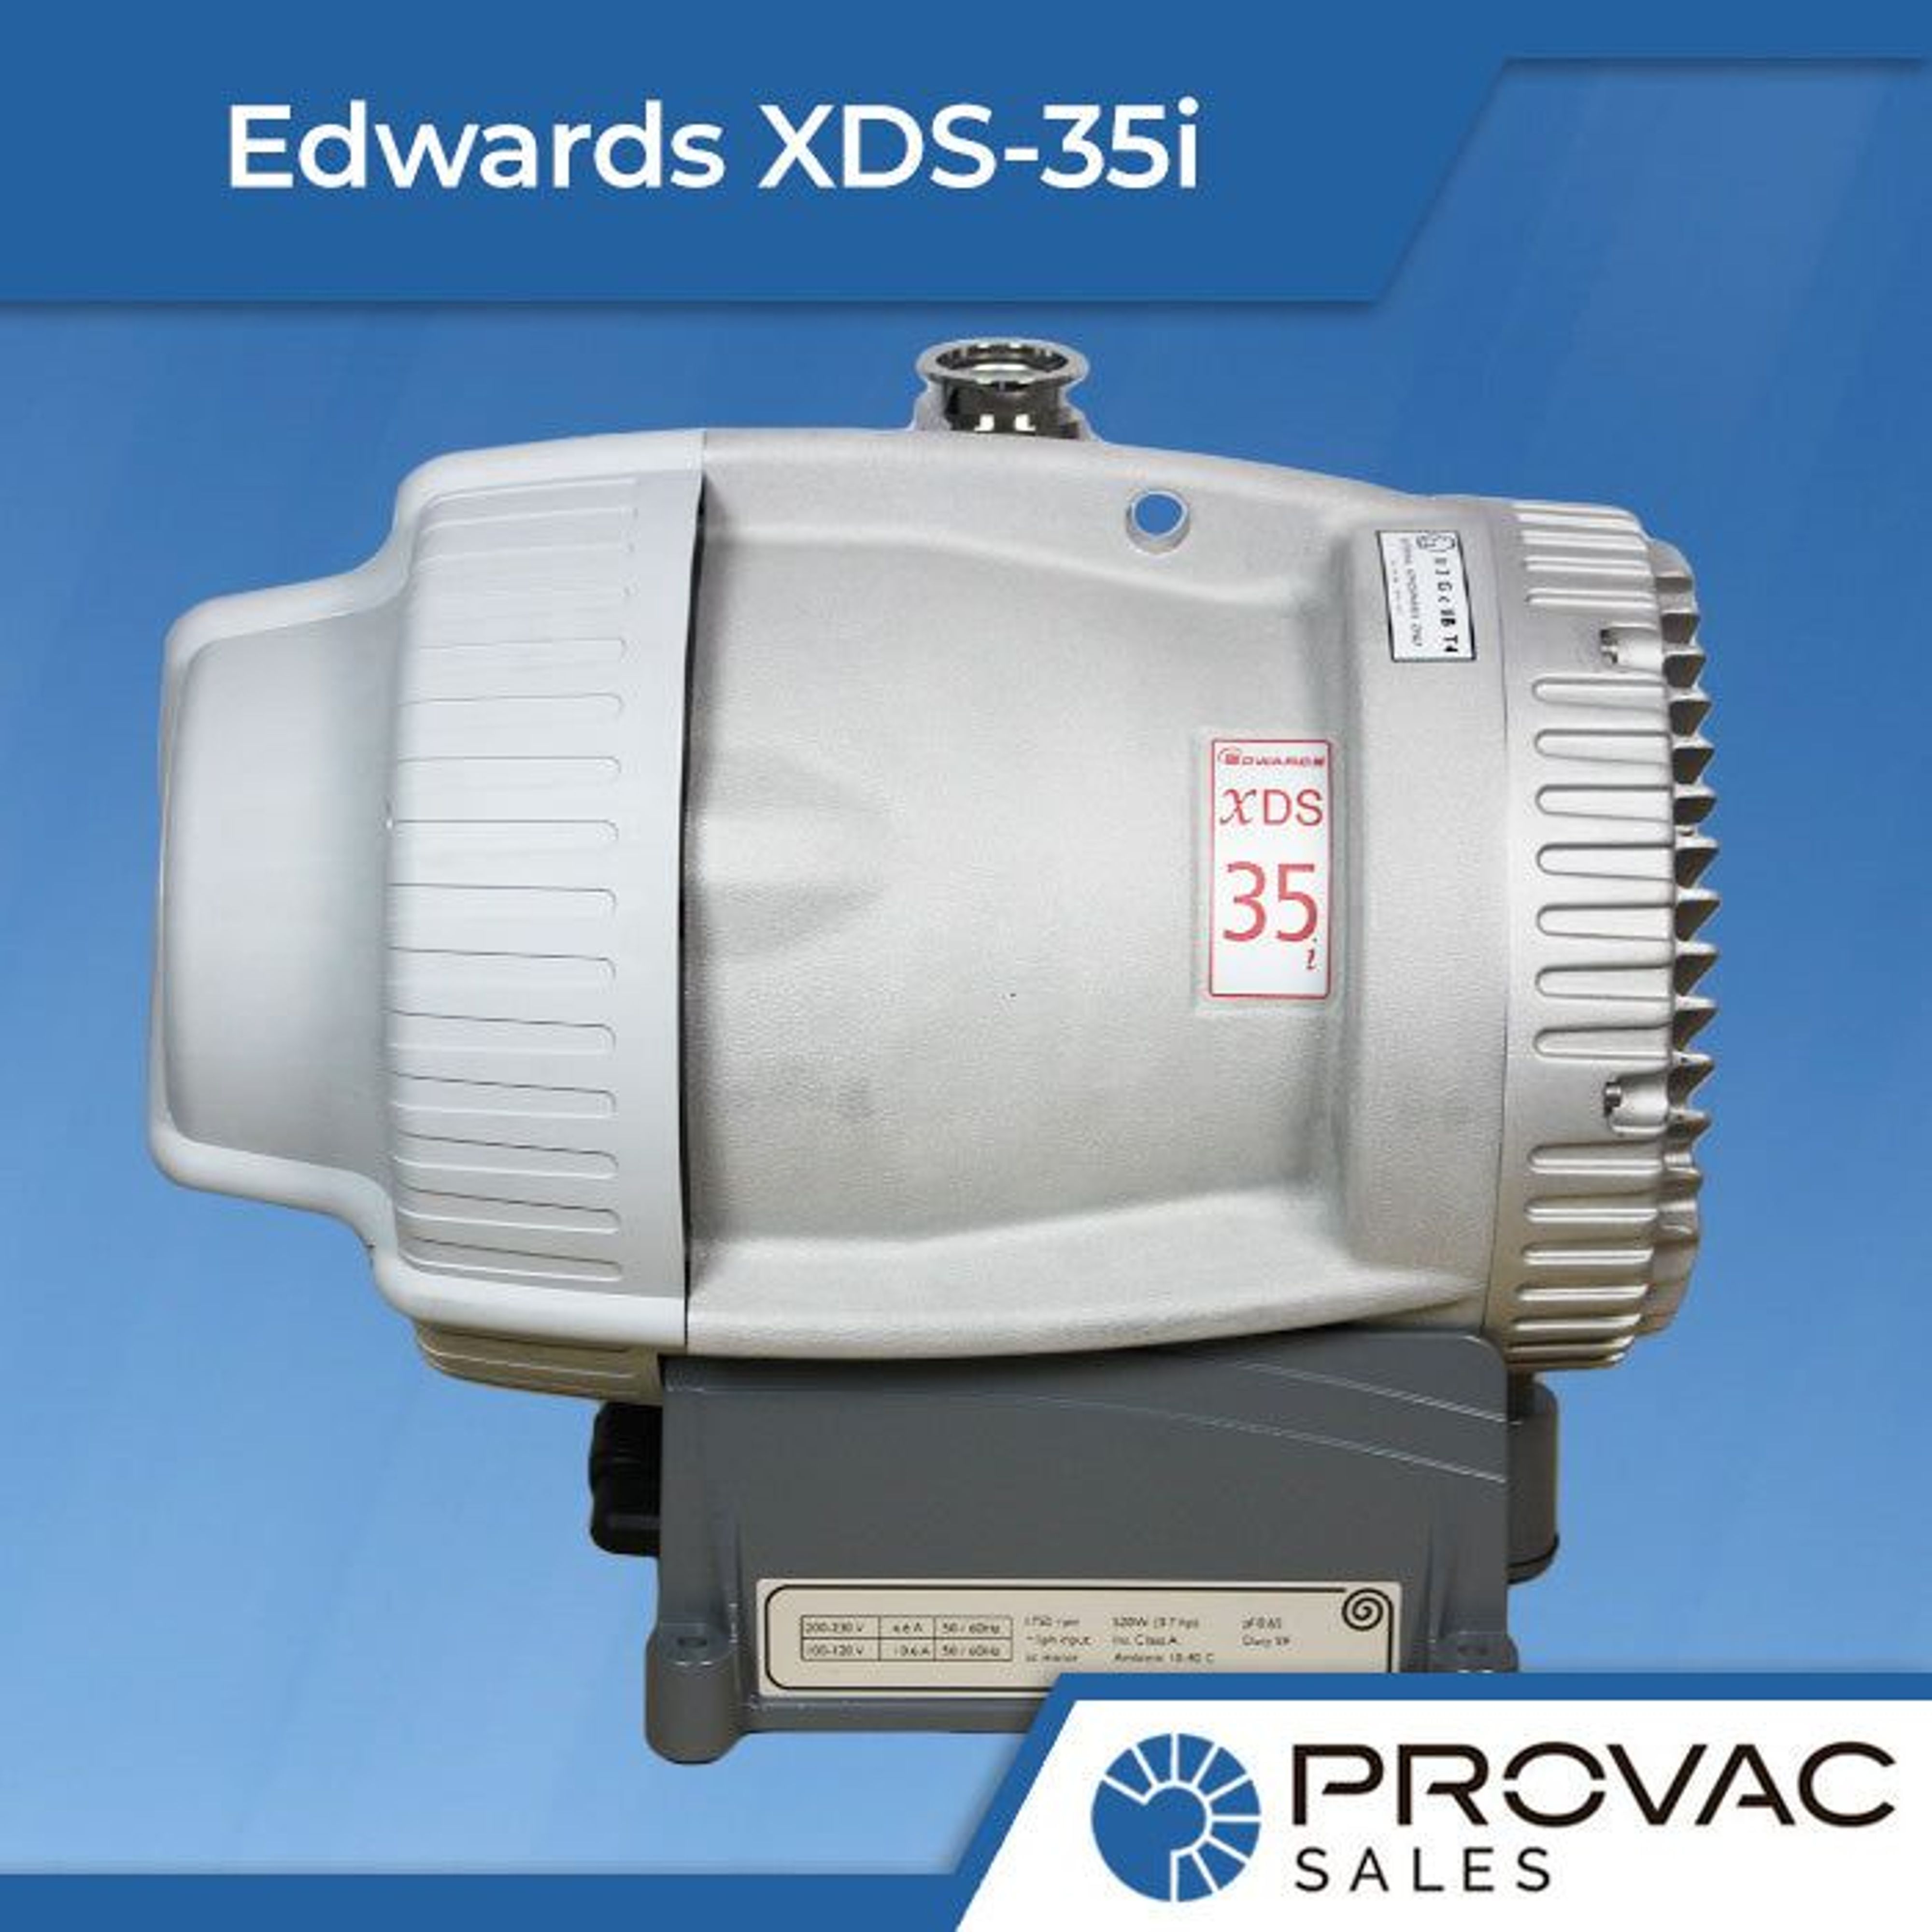 Edwards XDS-35i Scroll Pump: In Stock, Ready to Ship Background